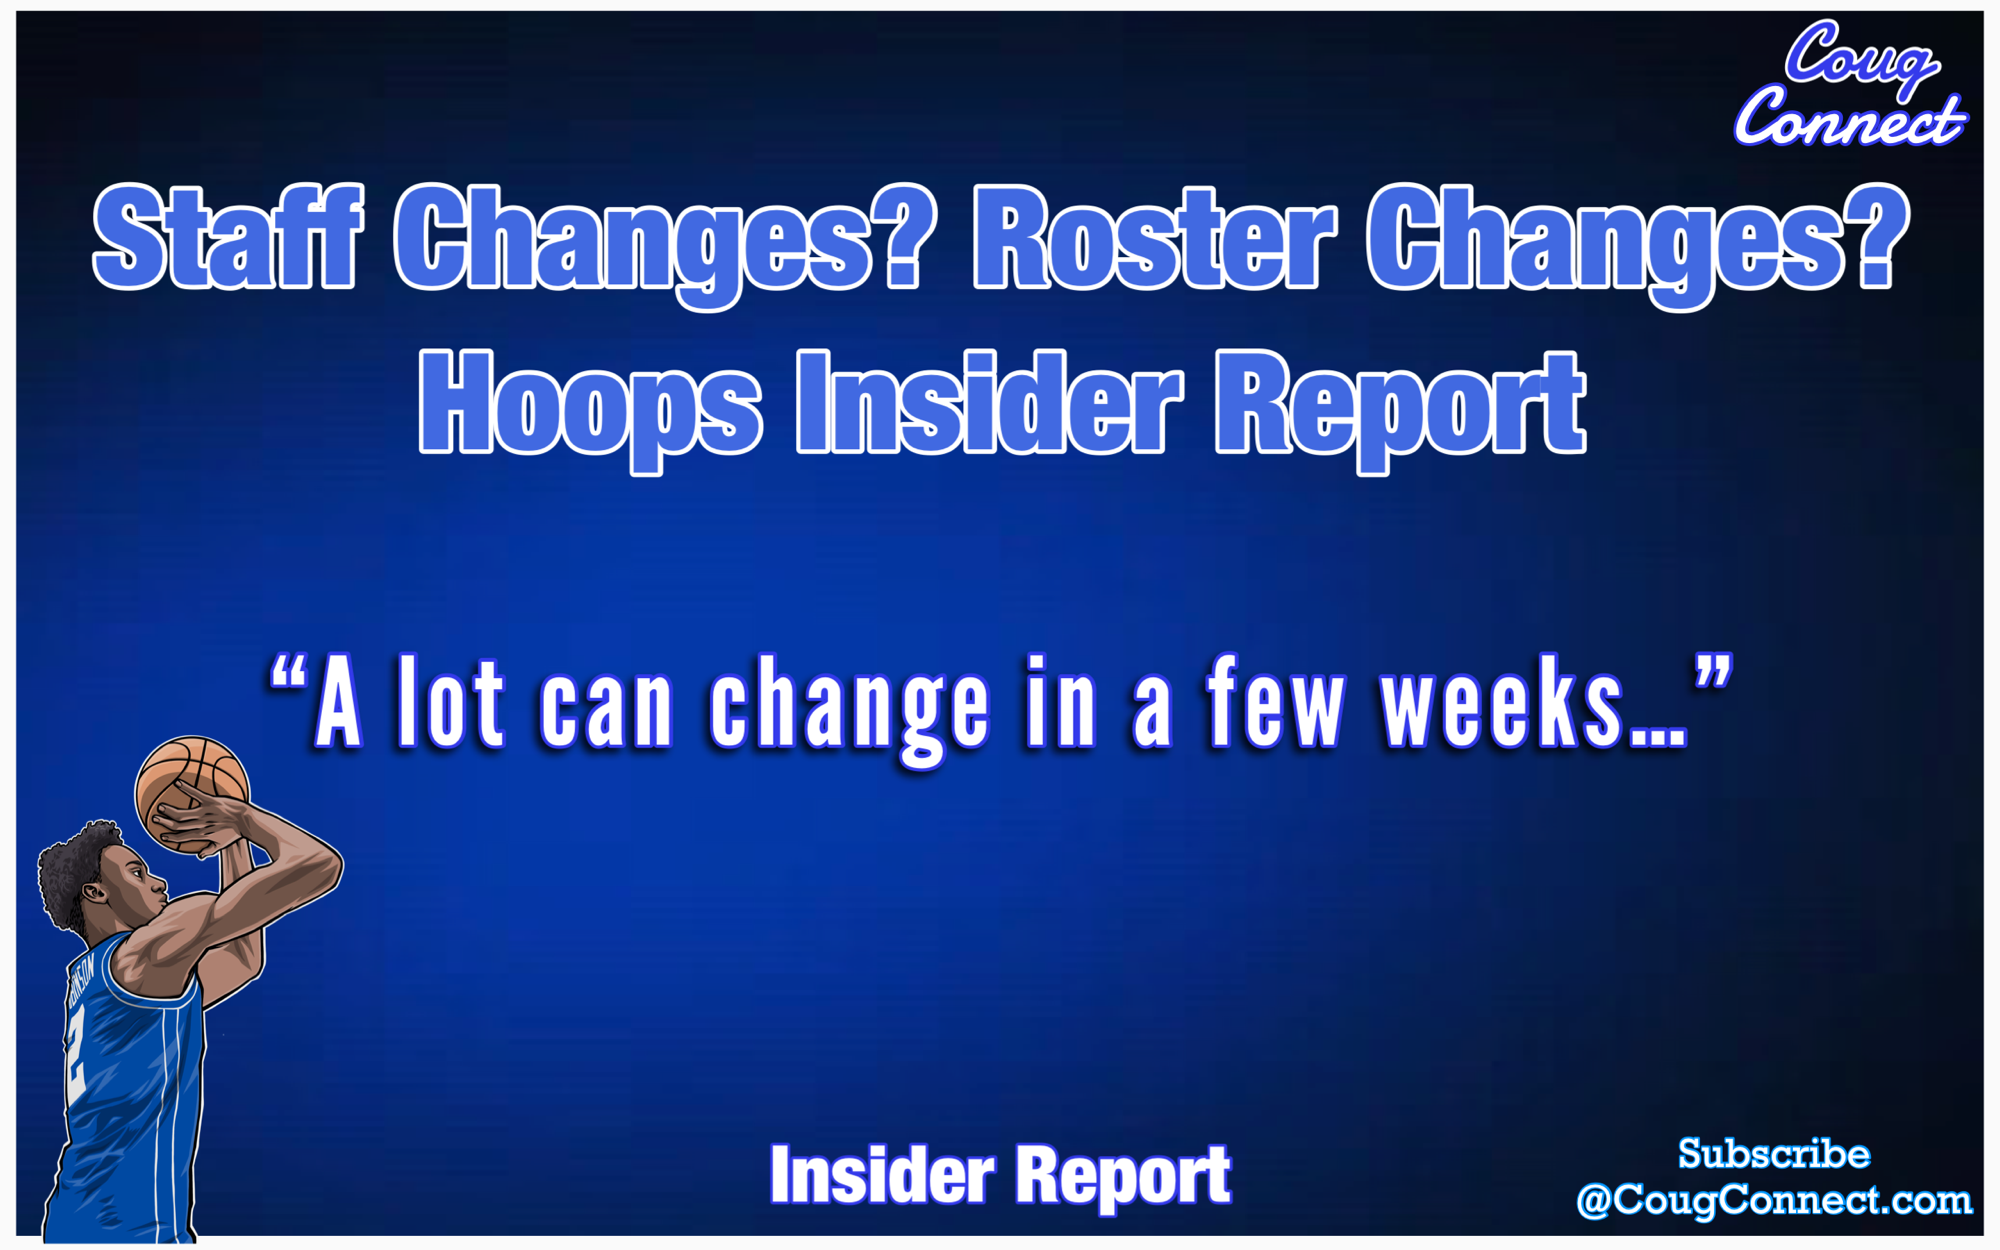 Staff Changes? Roster Changes? Hoops Insider Report